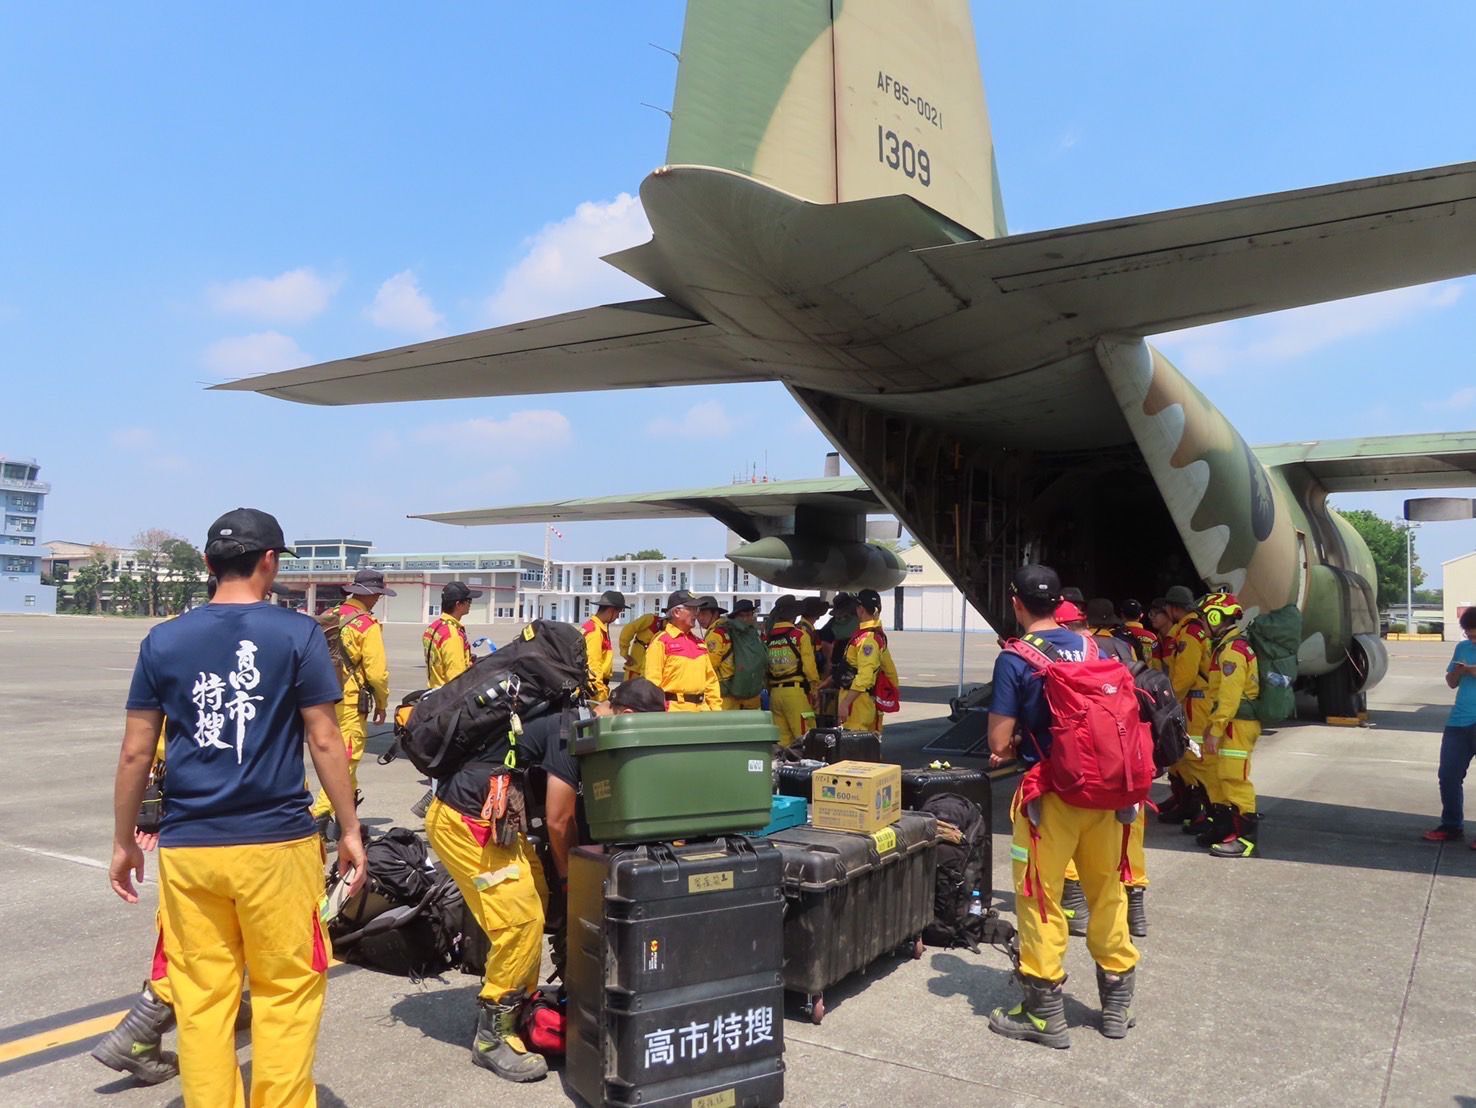 Taiwan’s air force sent C-130 aircraft to carry out disaster relief operations